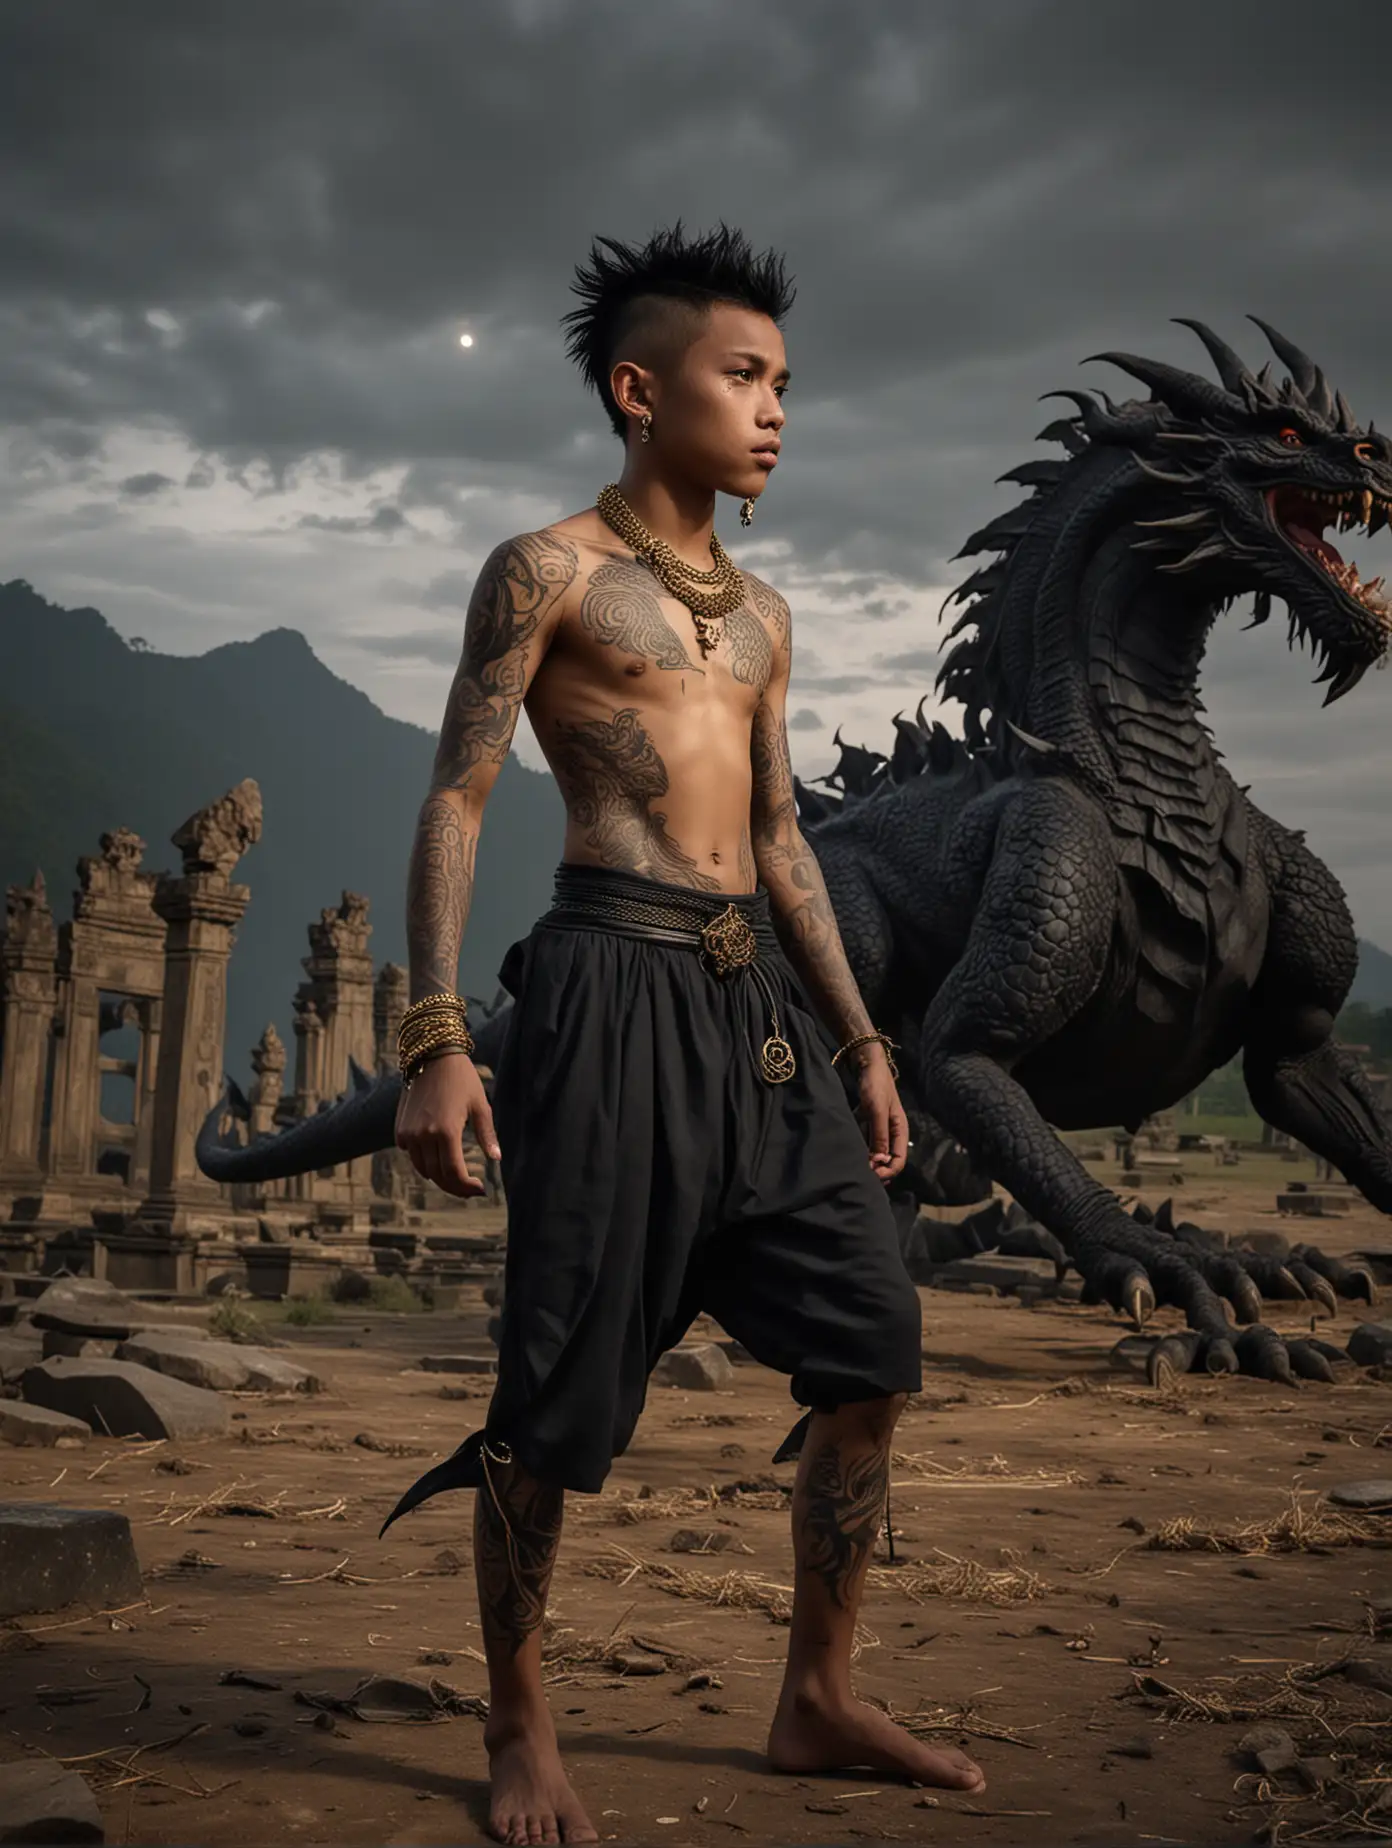 a 15 year old Indonesian boy with a bare chest, body full of tattoos, black mohak hair, dark skin color, wearing black cloth and gold jewelry fighting with a giant black dragon in a field of temple ruins at the foot of a mountain at night